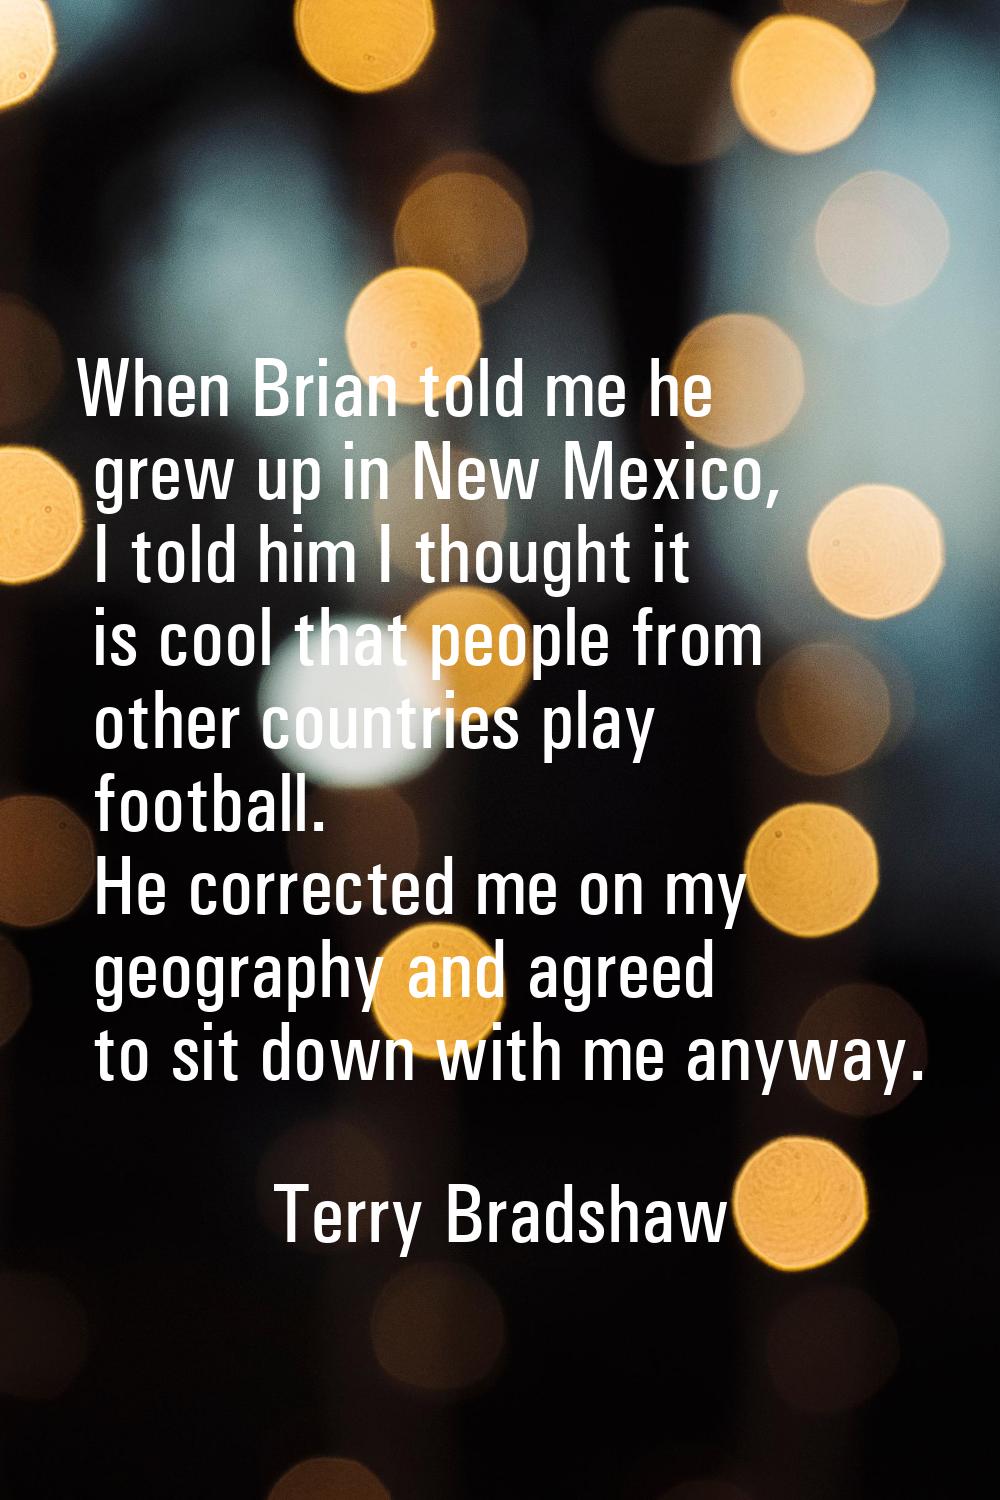 When Brian told me he grew up in New Mexico, I told him I thought it is cool that people from other